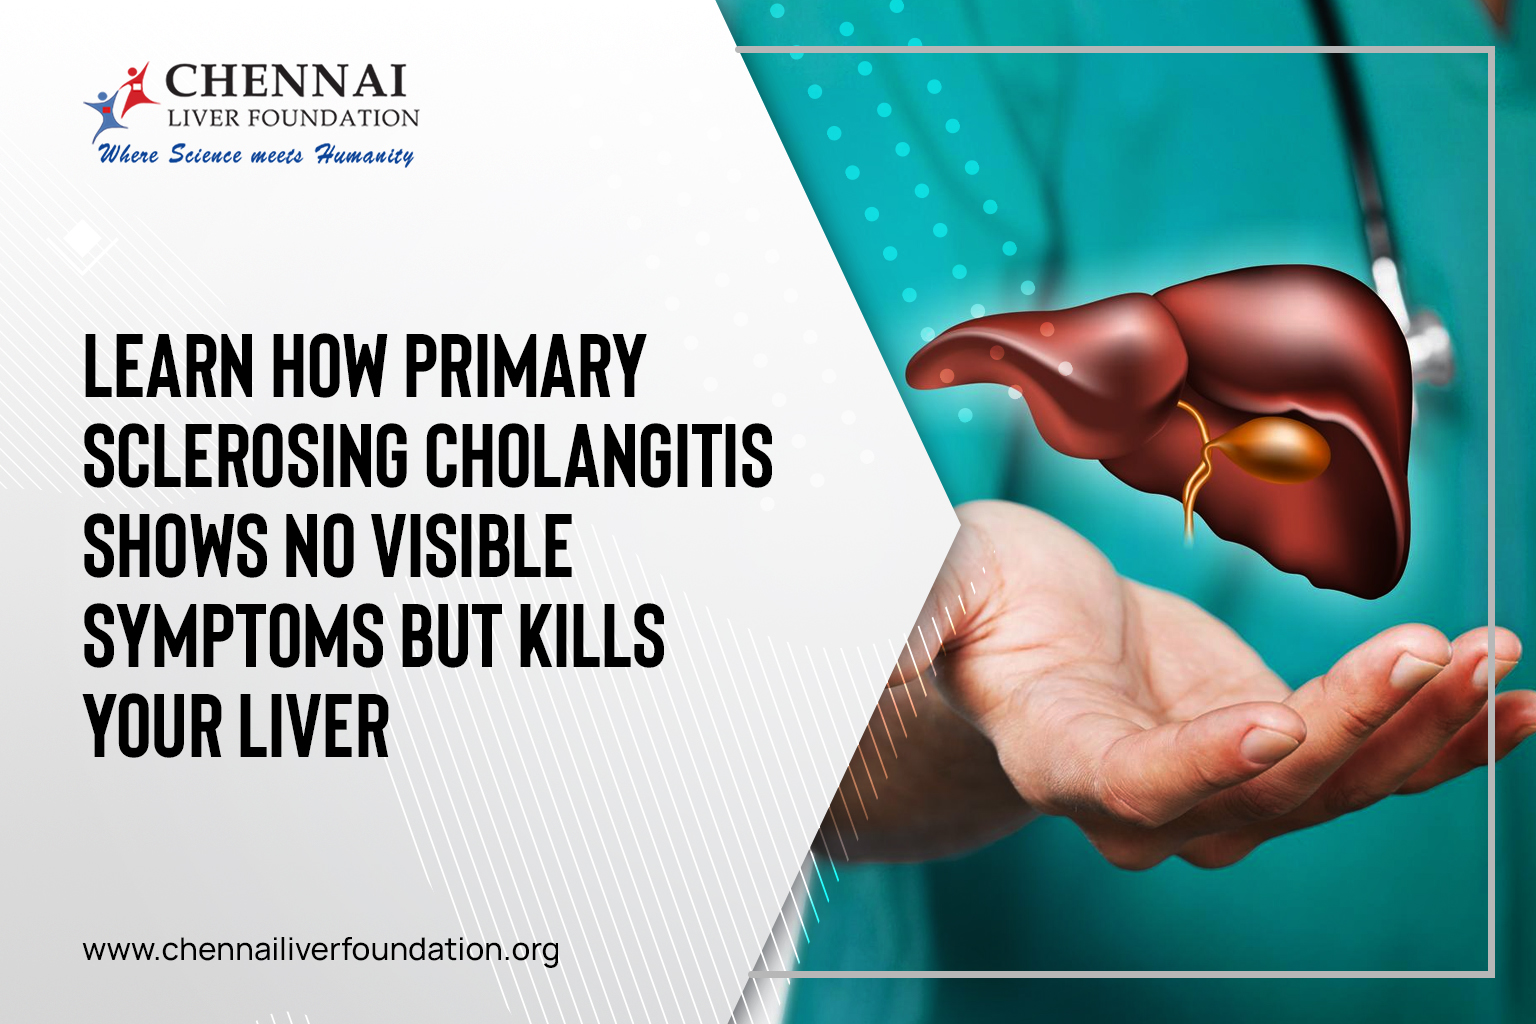 Learn How Primary Sclerosing Cholangitis Shows No Visible Symptoms But Kills Your Liver